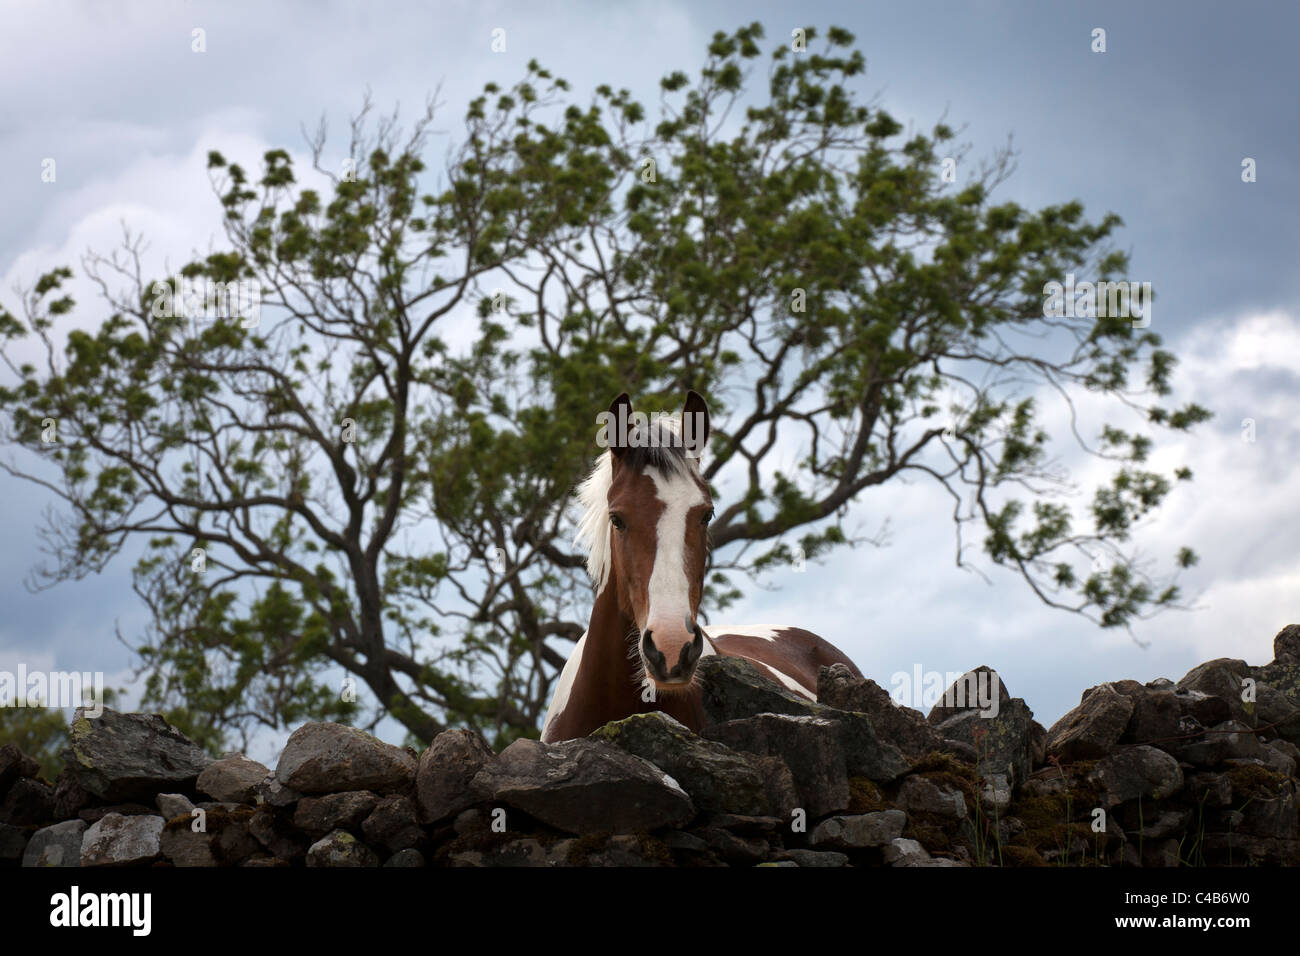 A skewbald horse leaning over a drystone wall in Cumbria showing just the head and neck with a tree in the background Stock Photo